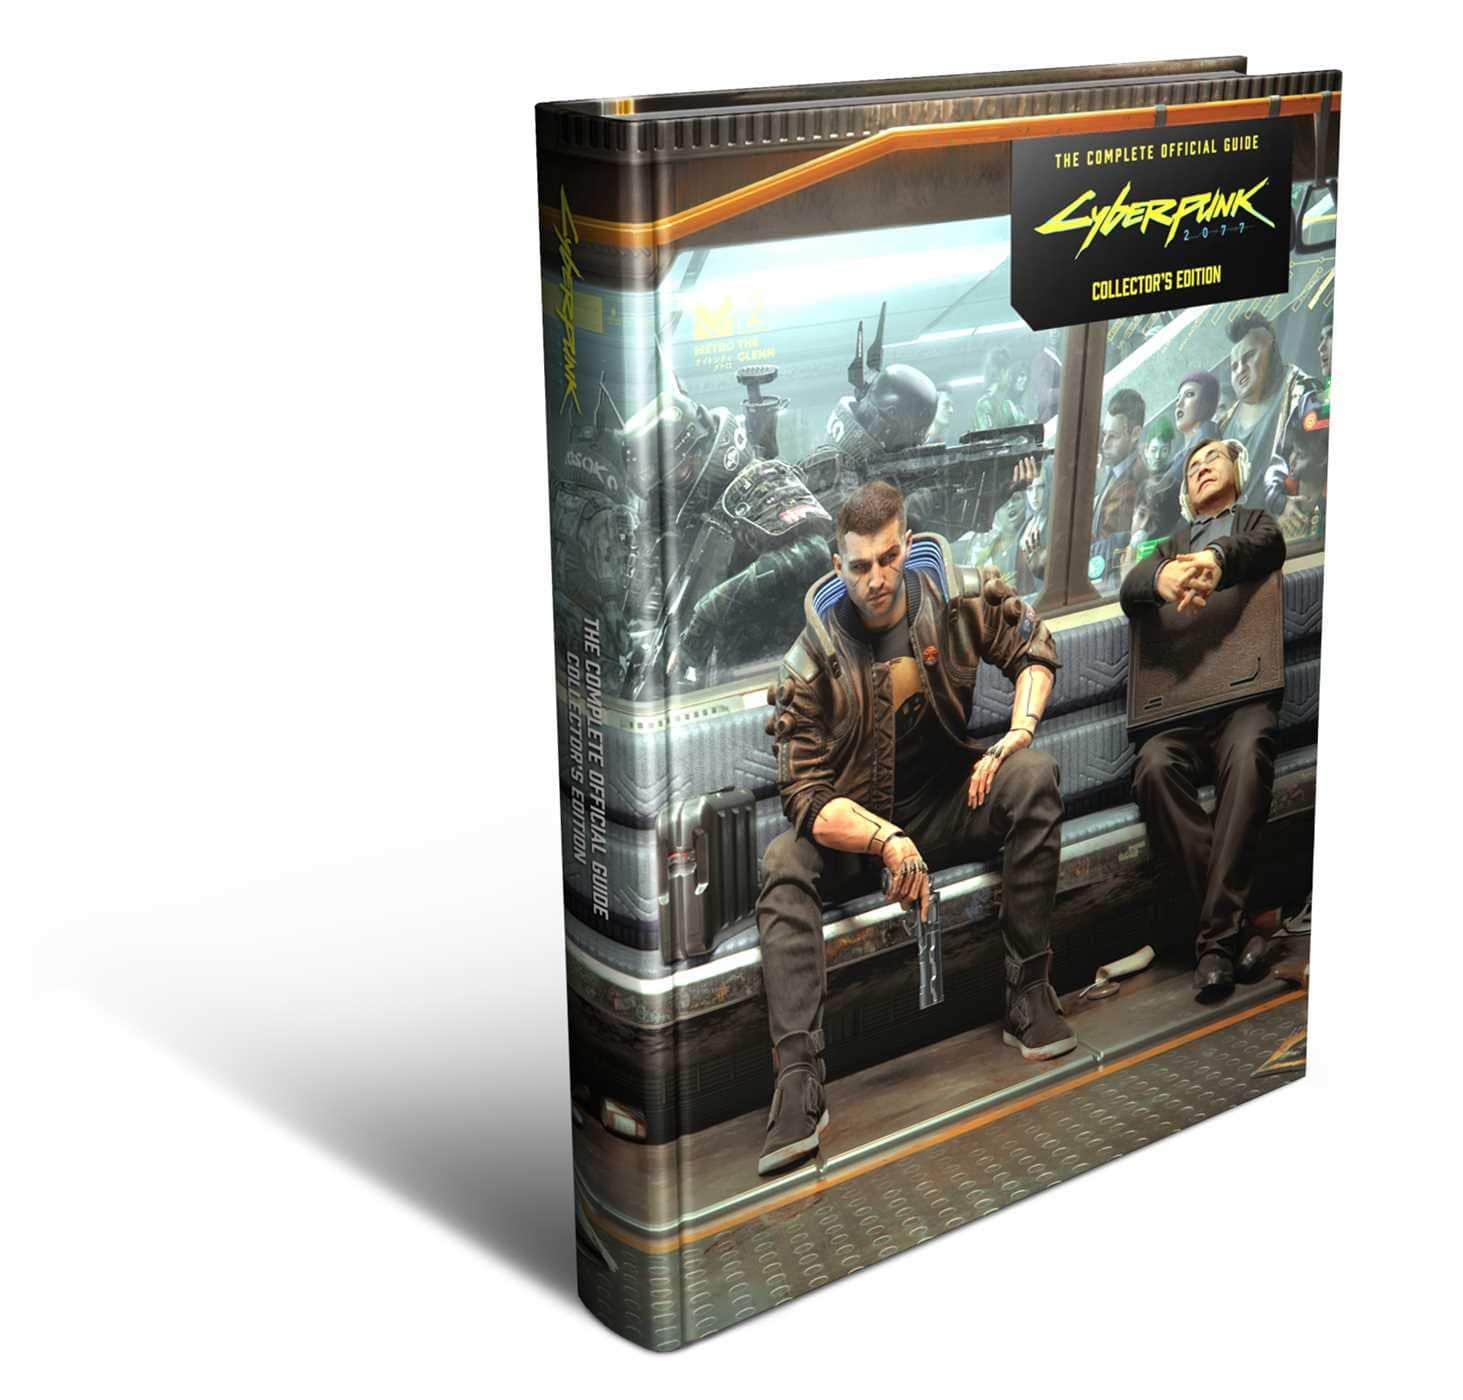 Cyberpunk 2077: The Complete Official Guide - Collector's Edition